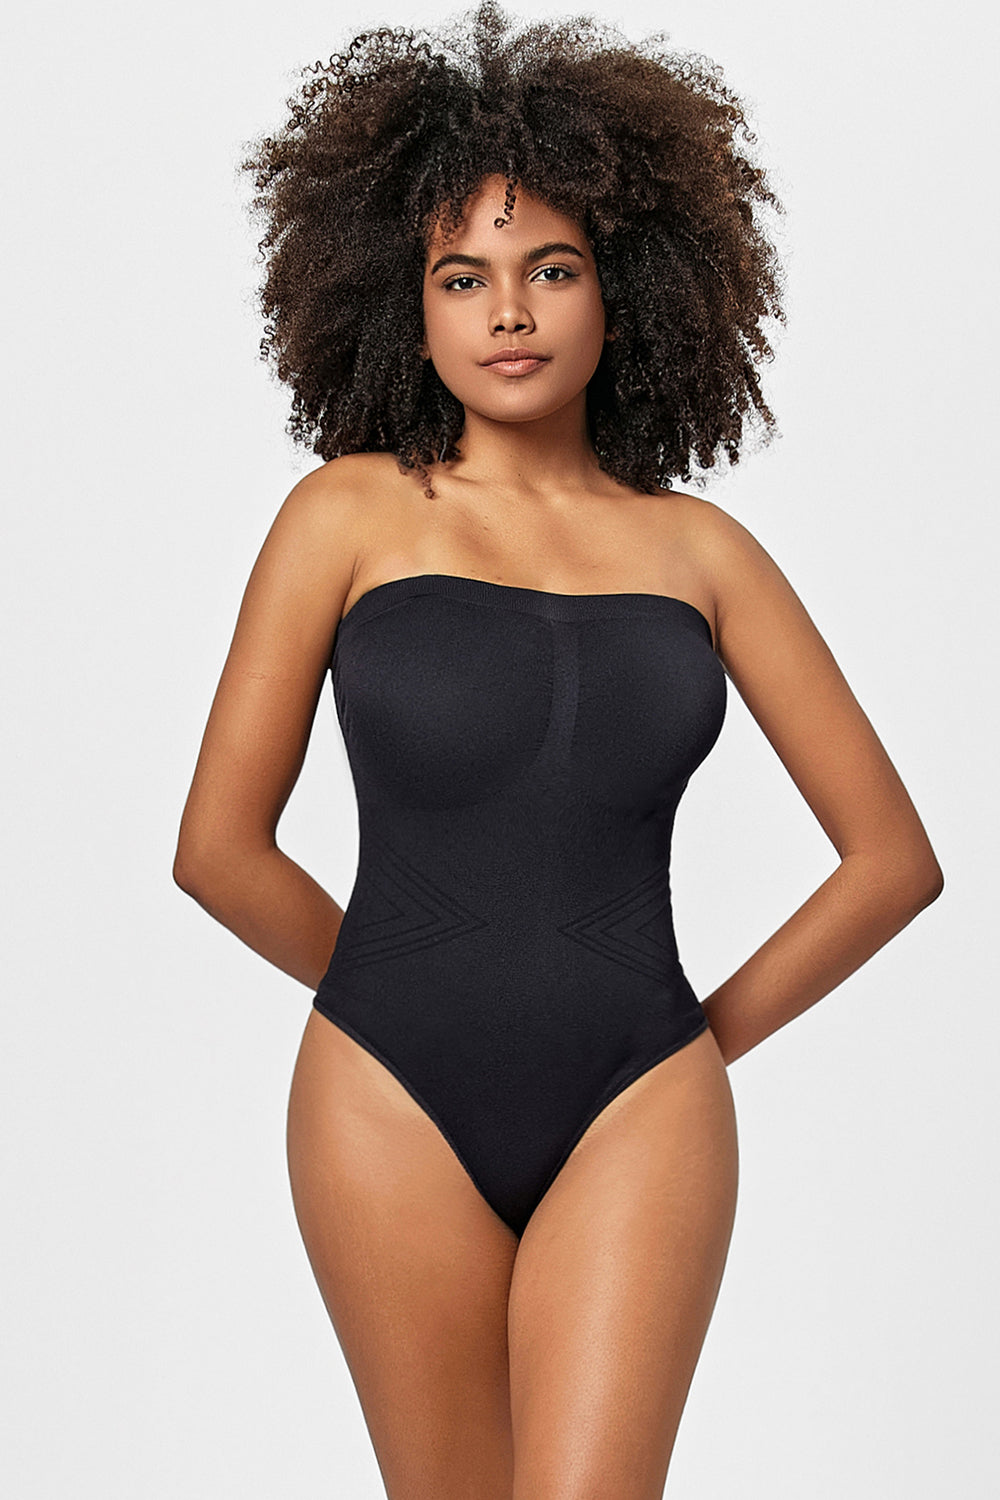 Women's Embroidered Body Shapers One piece Bodysuit Tummy Control